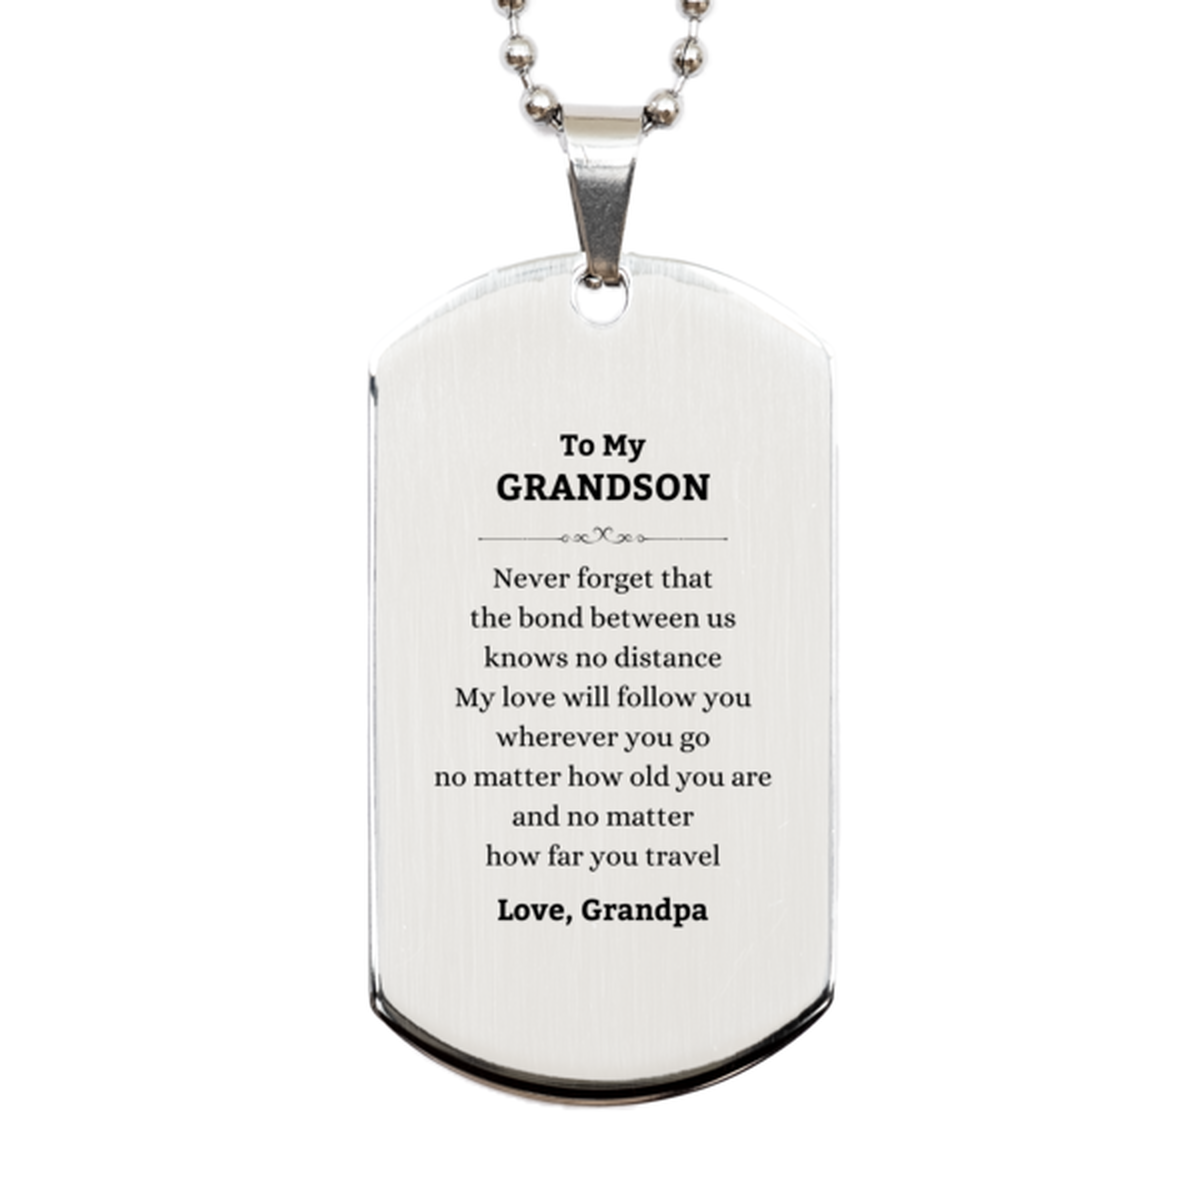 Grandson Birthday Gifts from Grandpa, Adjustable Silver Dog Tag for Grandson Christmas Graduation Unique Gifts Grandson Never forget that the bond between us knows no distance. Love, Grandpa